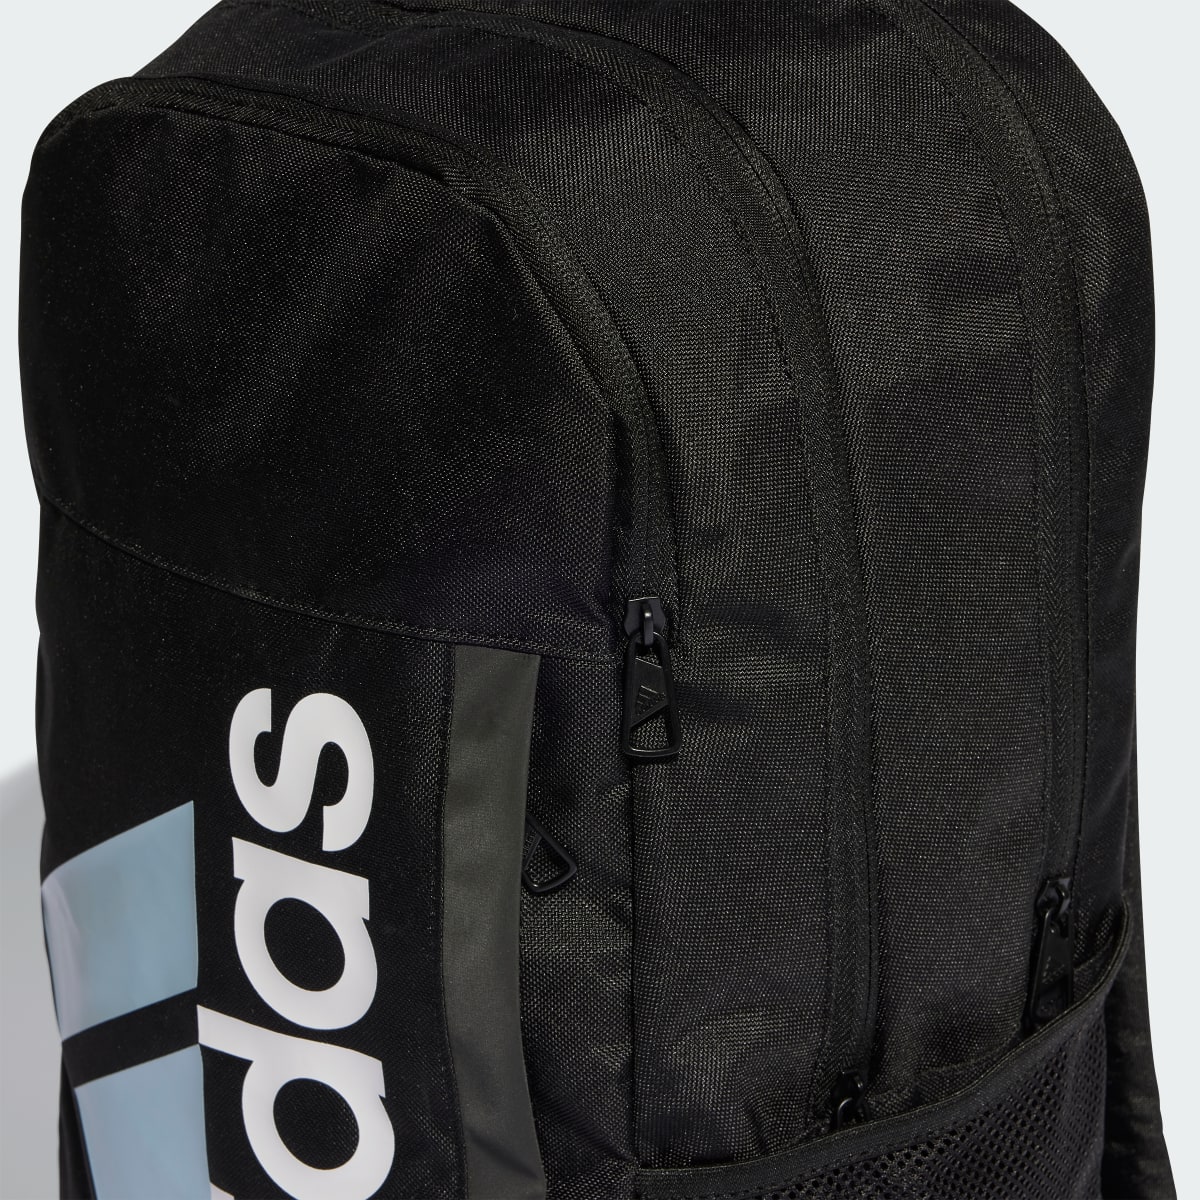 Adidas Motion SPW Graphic Backpack. 6